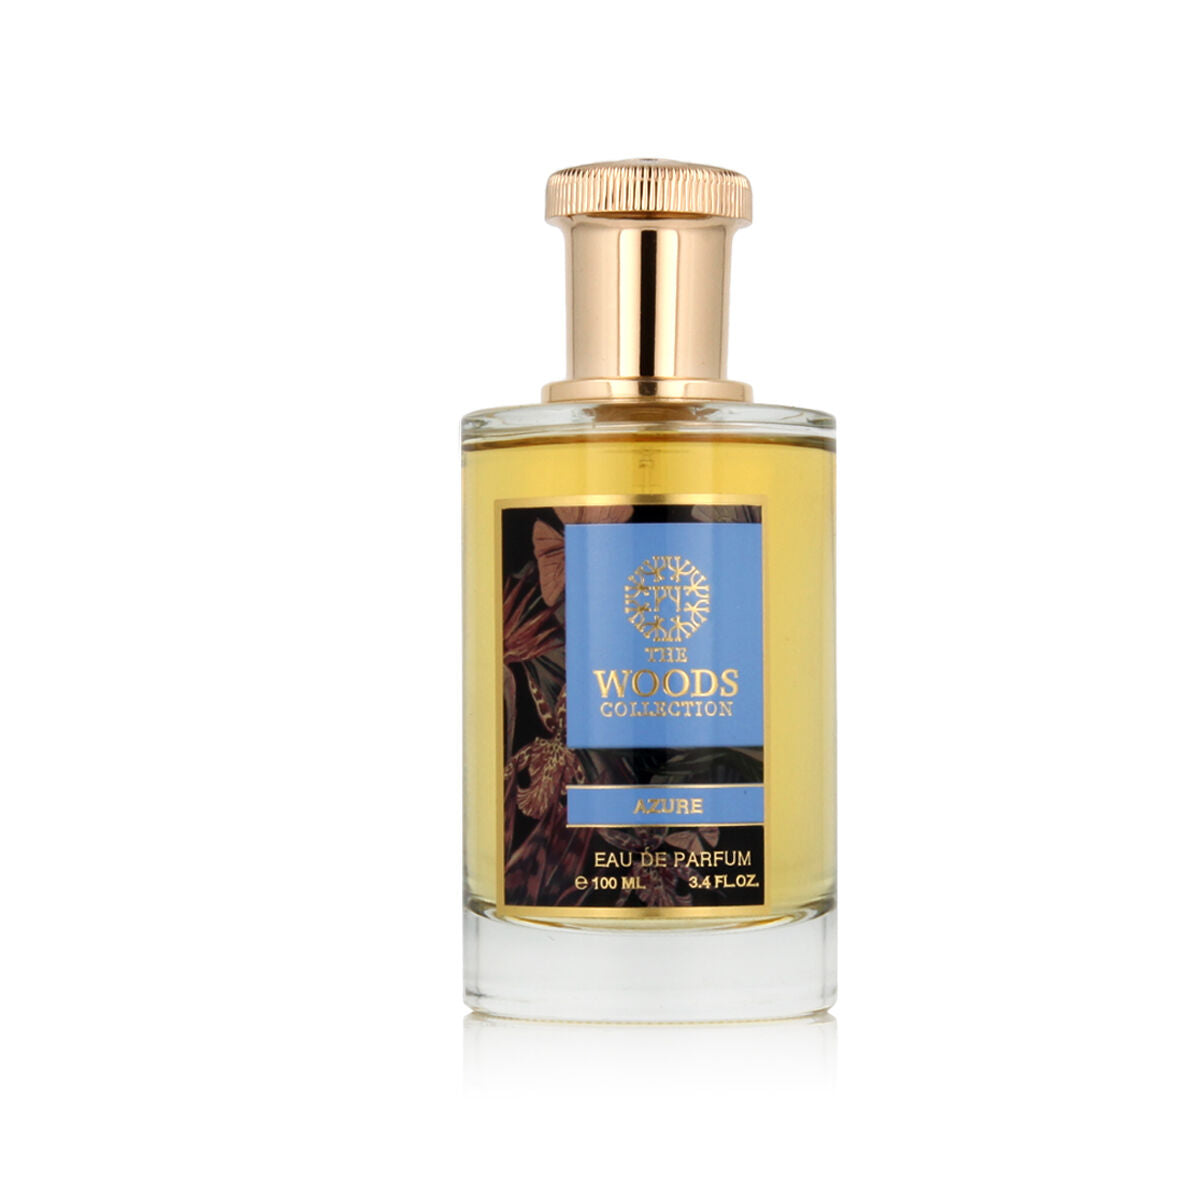 Unisex parfym The Woods Collection edp azure 100 ml